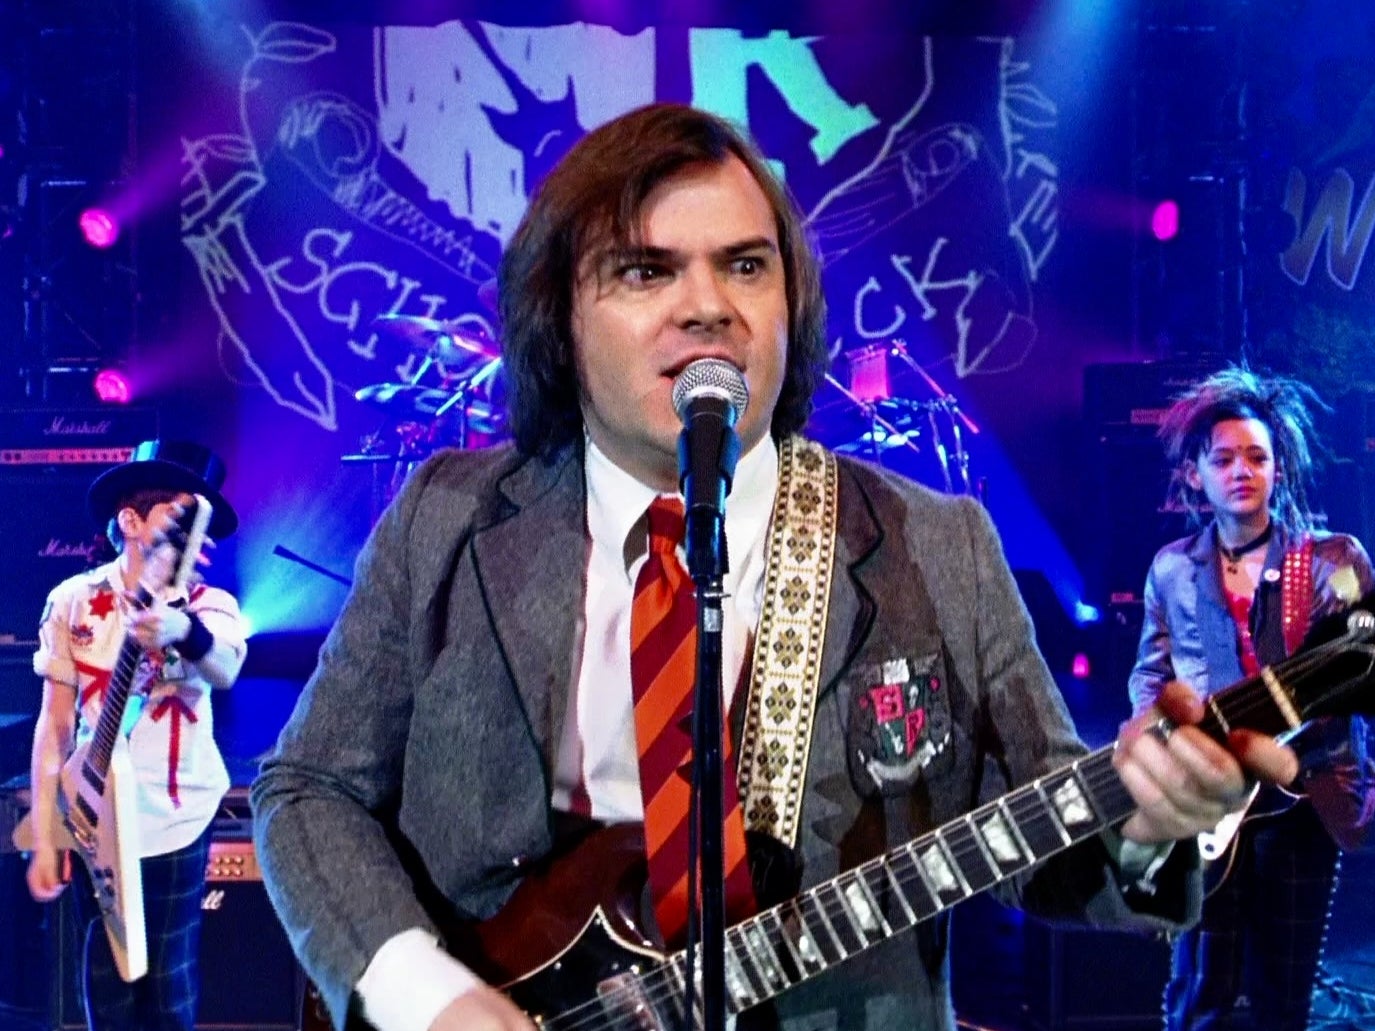 Jack Black in ‘School of Rock’, which is being removed from Netflix